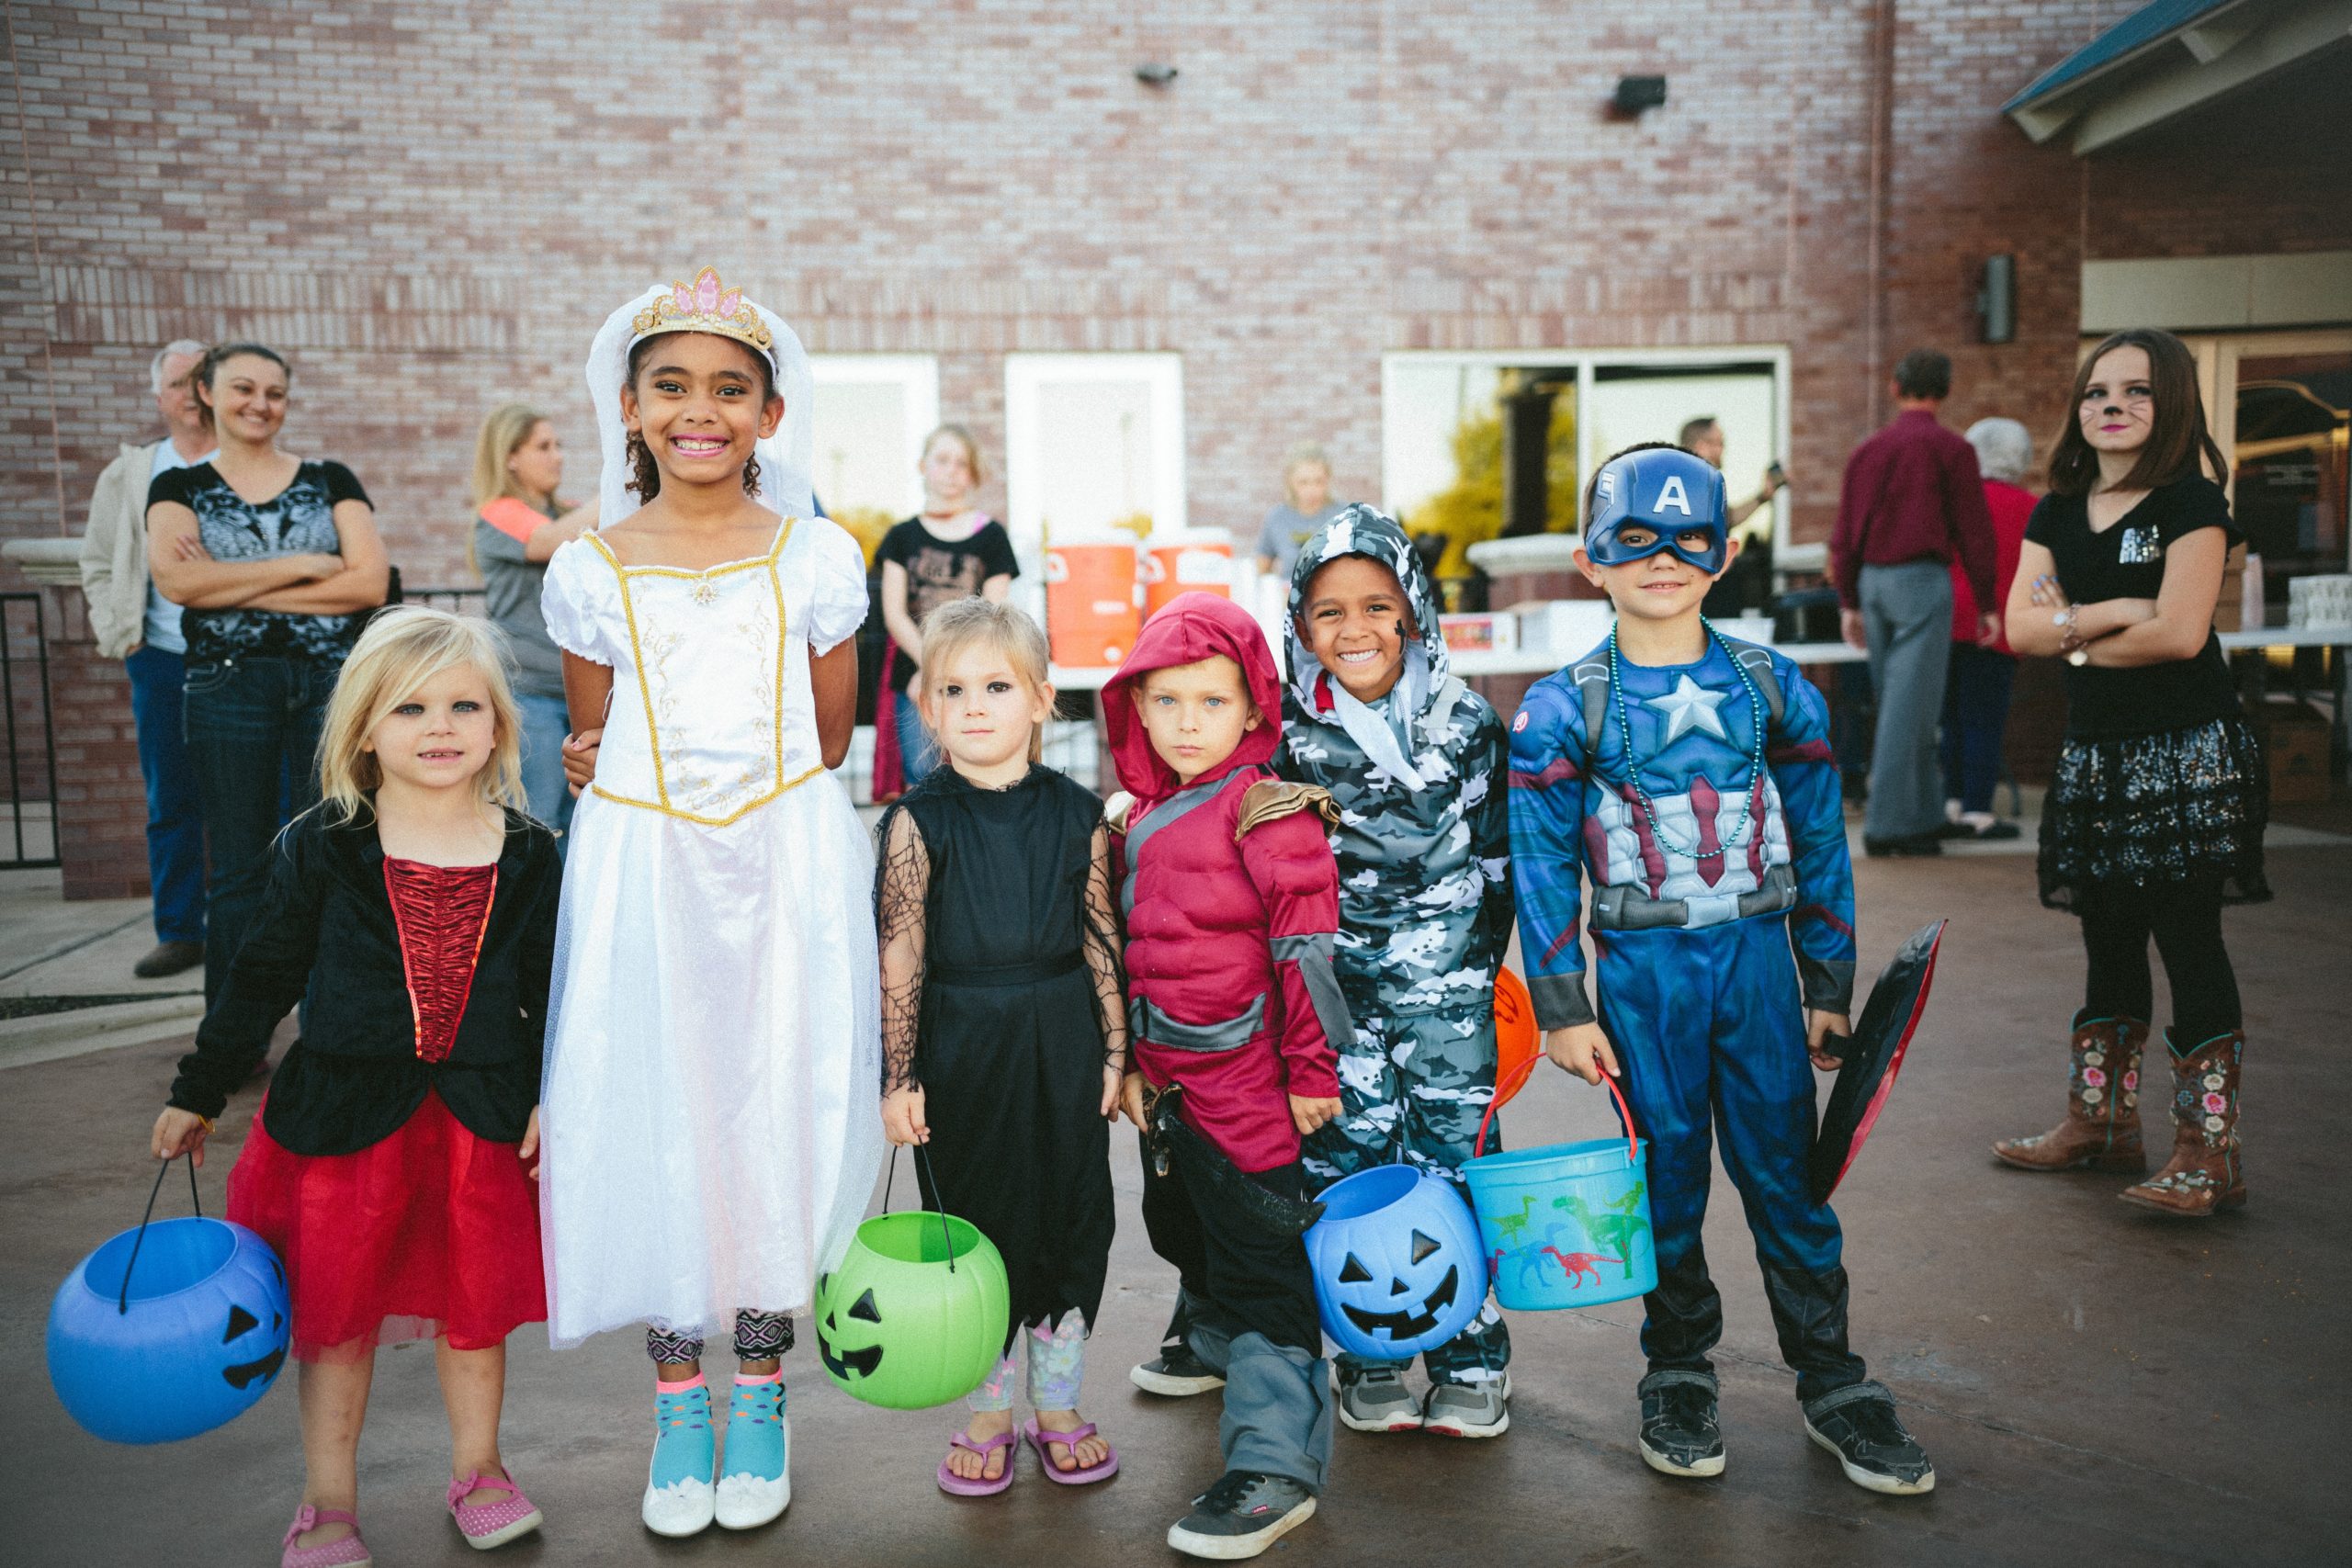 Kids of all ages posing for picture in Halloween costumes